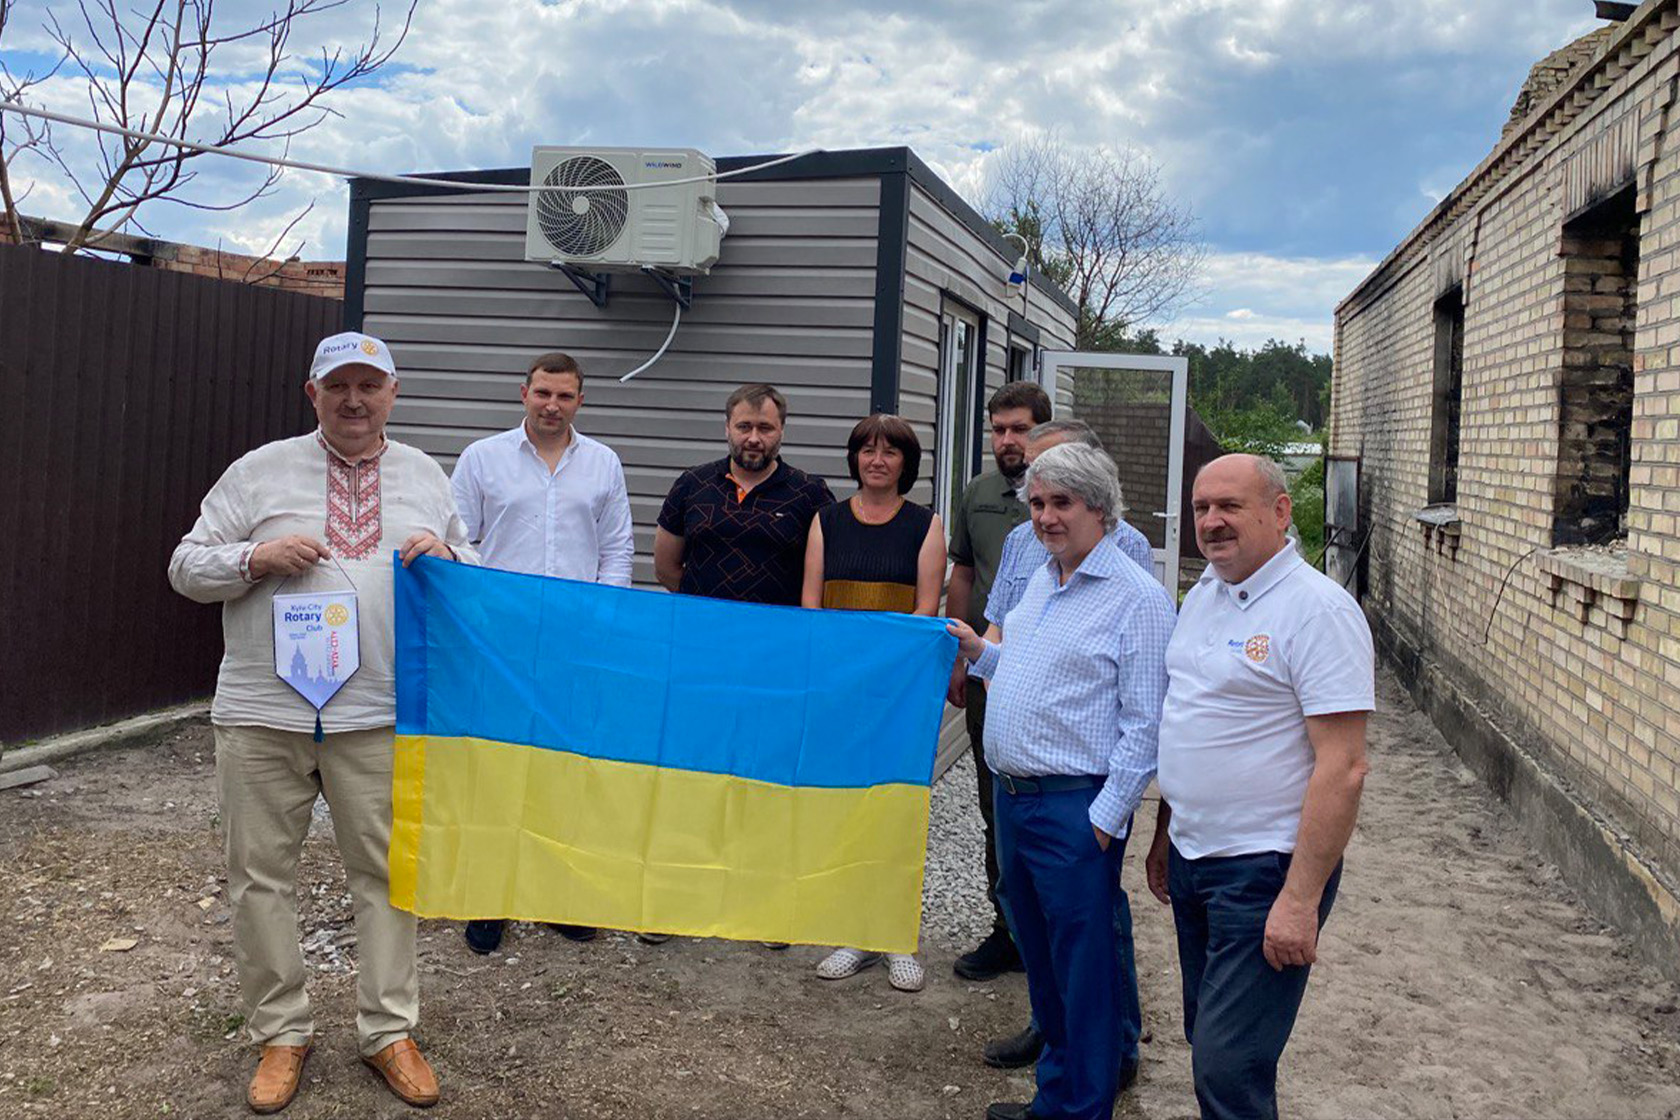 Maine Rotary Club helps save lives in Ukraine